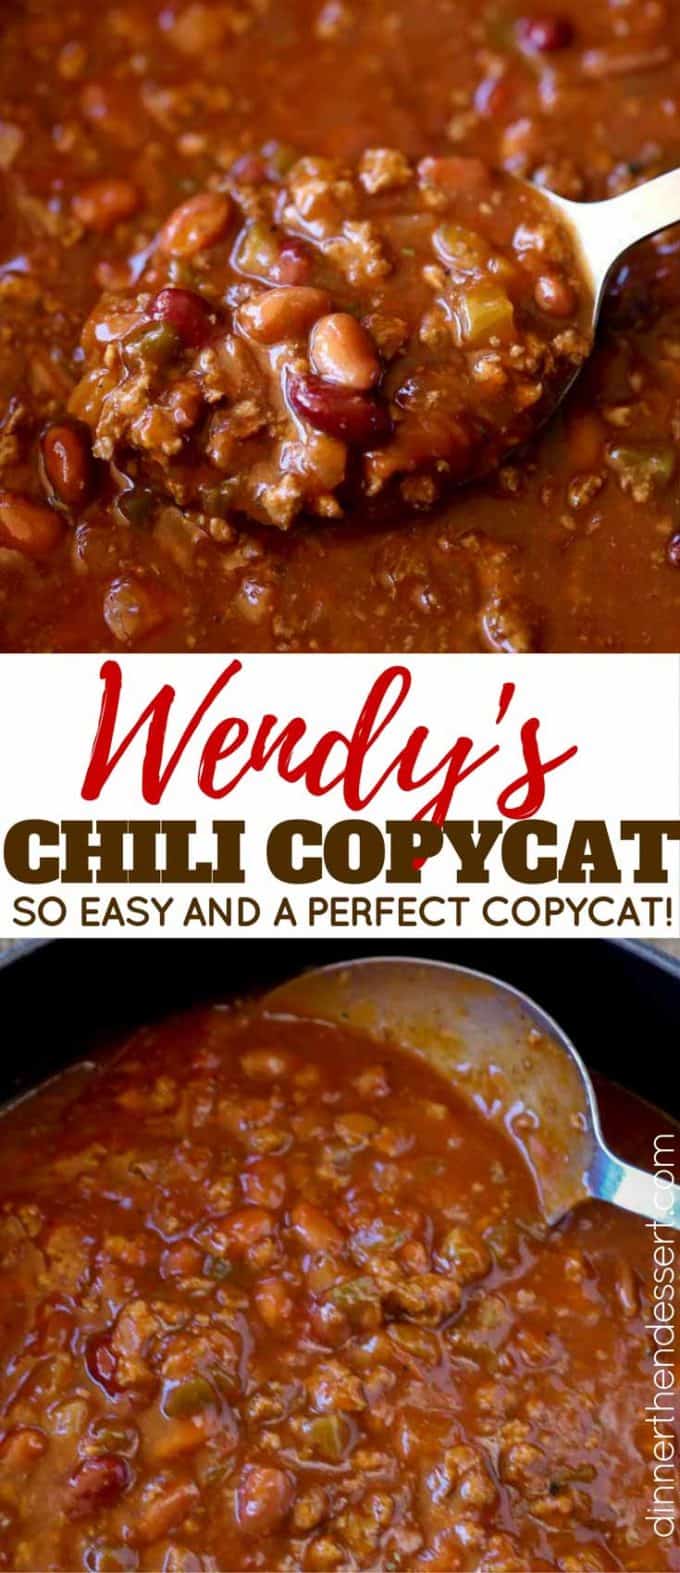 Wendy's Chili copycat made with kidney beans, onions, chilis, bell peppers and tomatoes with a spicy chili powder and cumin spices. Taste like a perfect copycat!